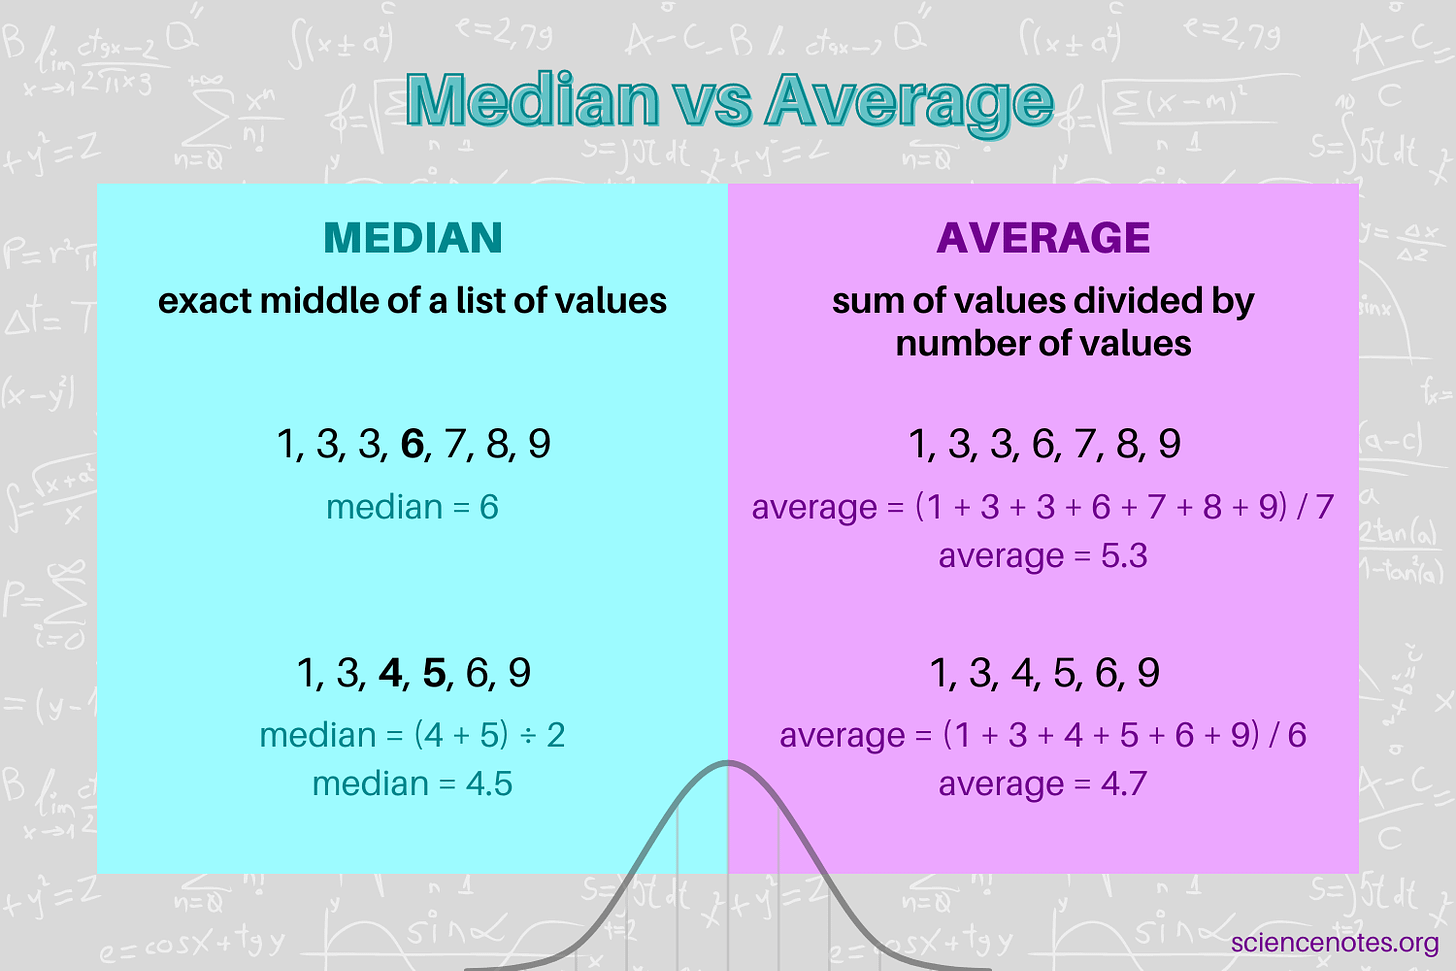 Median vs Average - Know the Difference Between Them